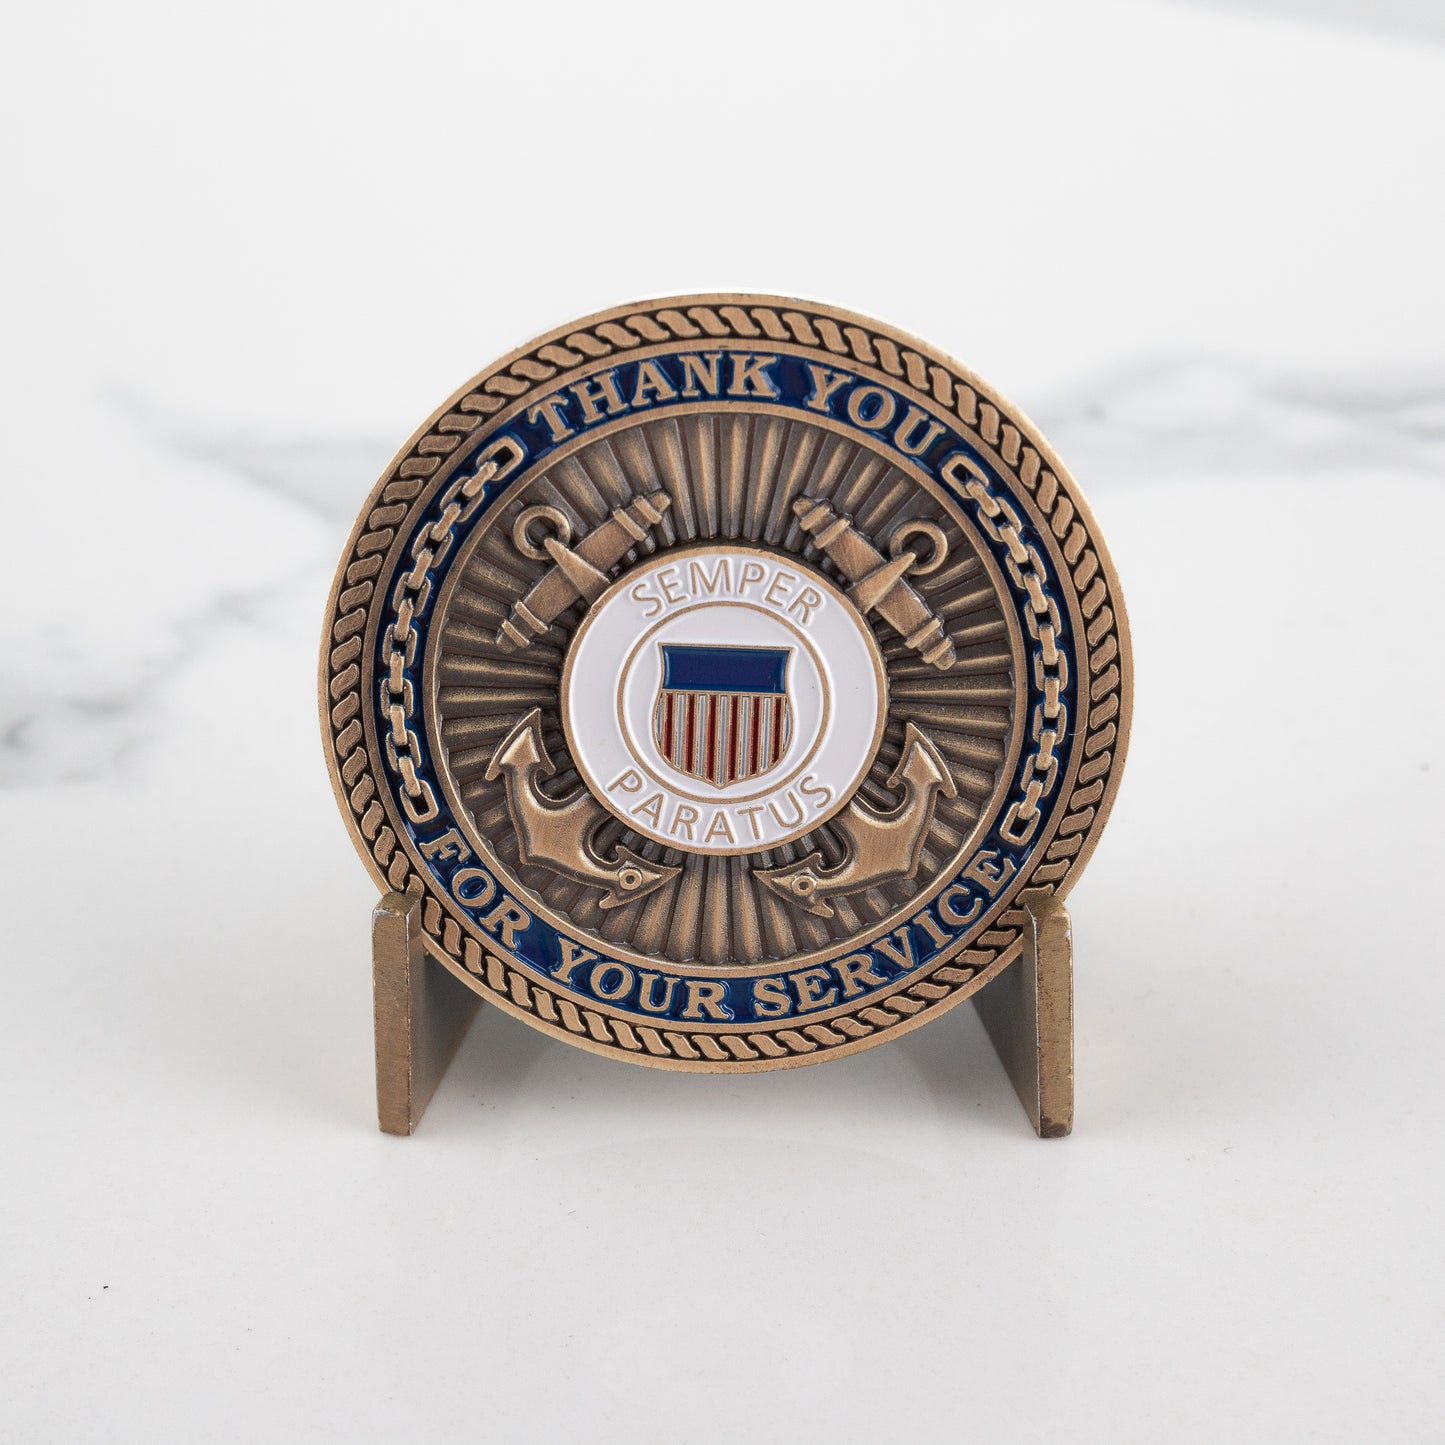 Coast Guard - Thank You For Your Service Coin